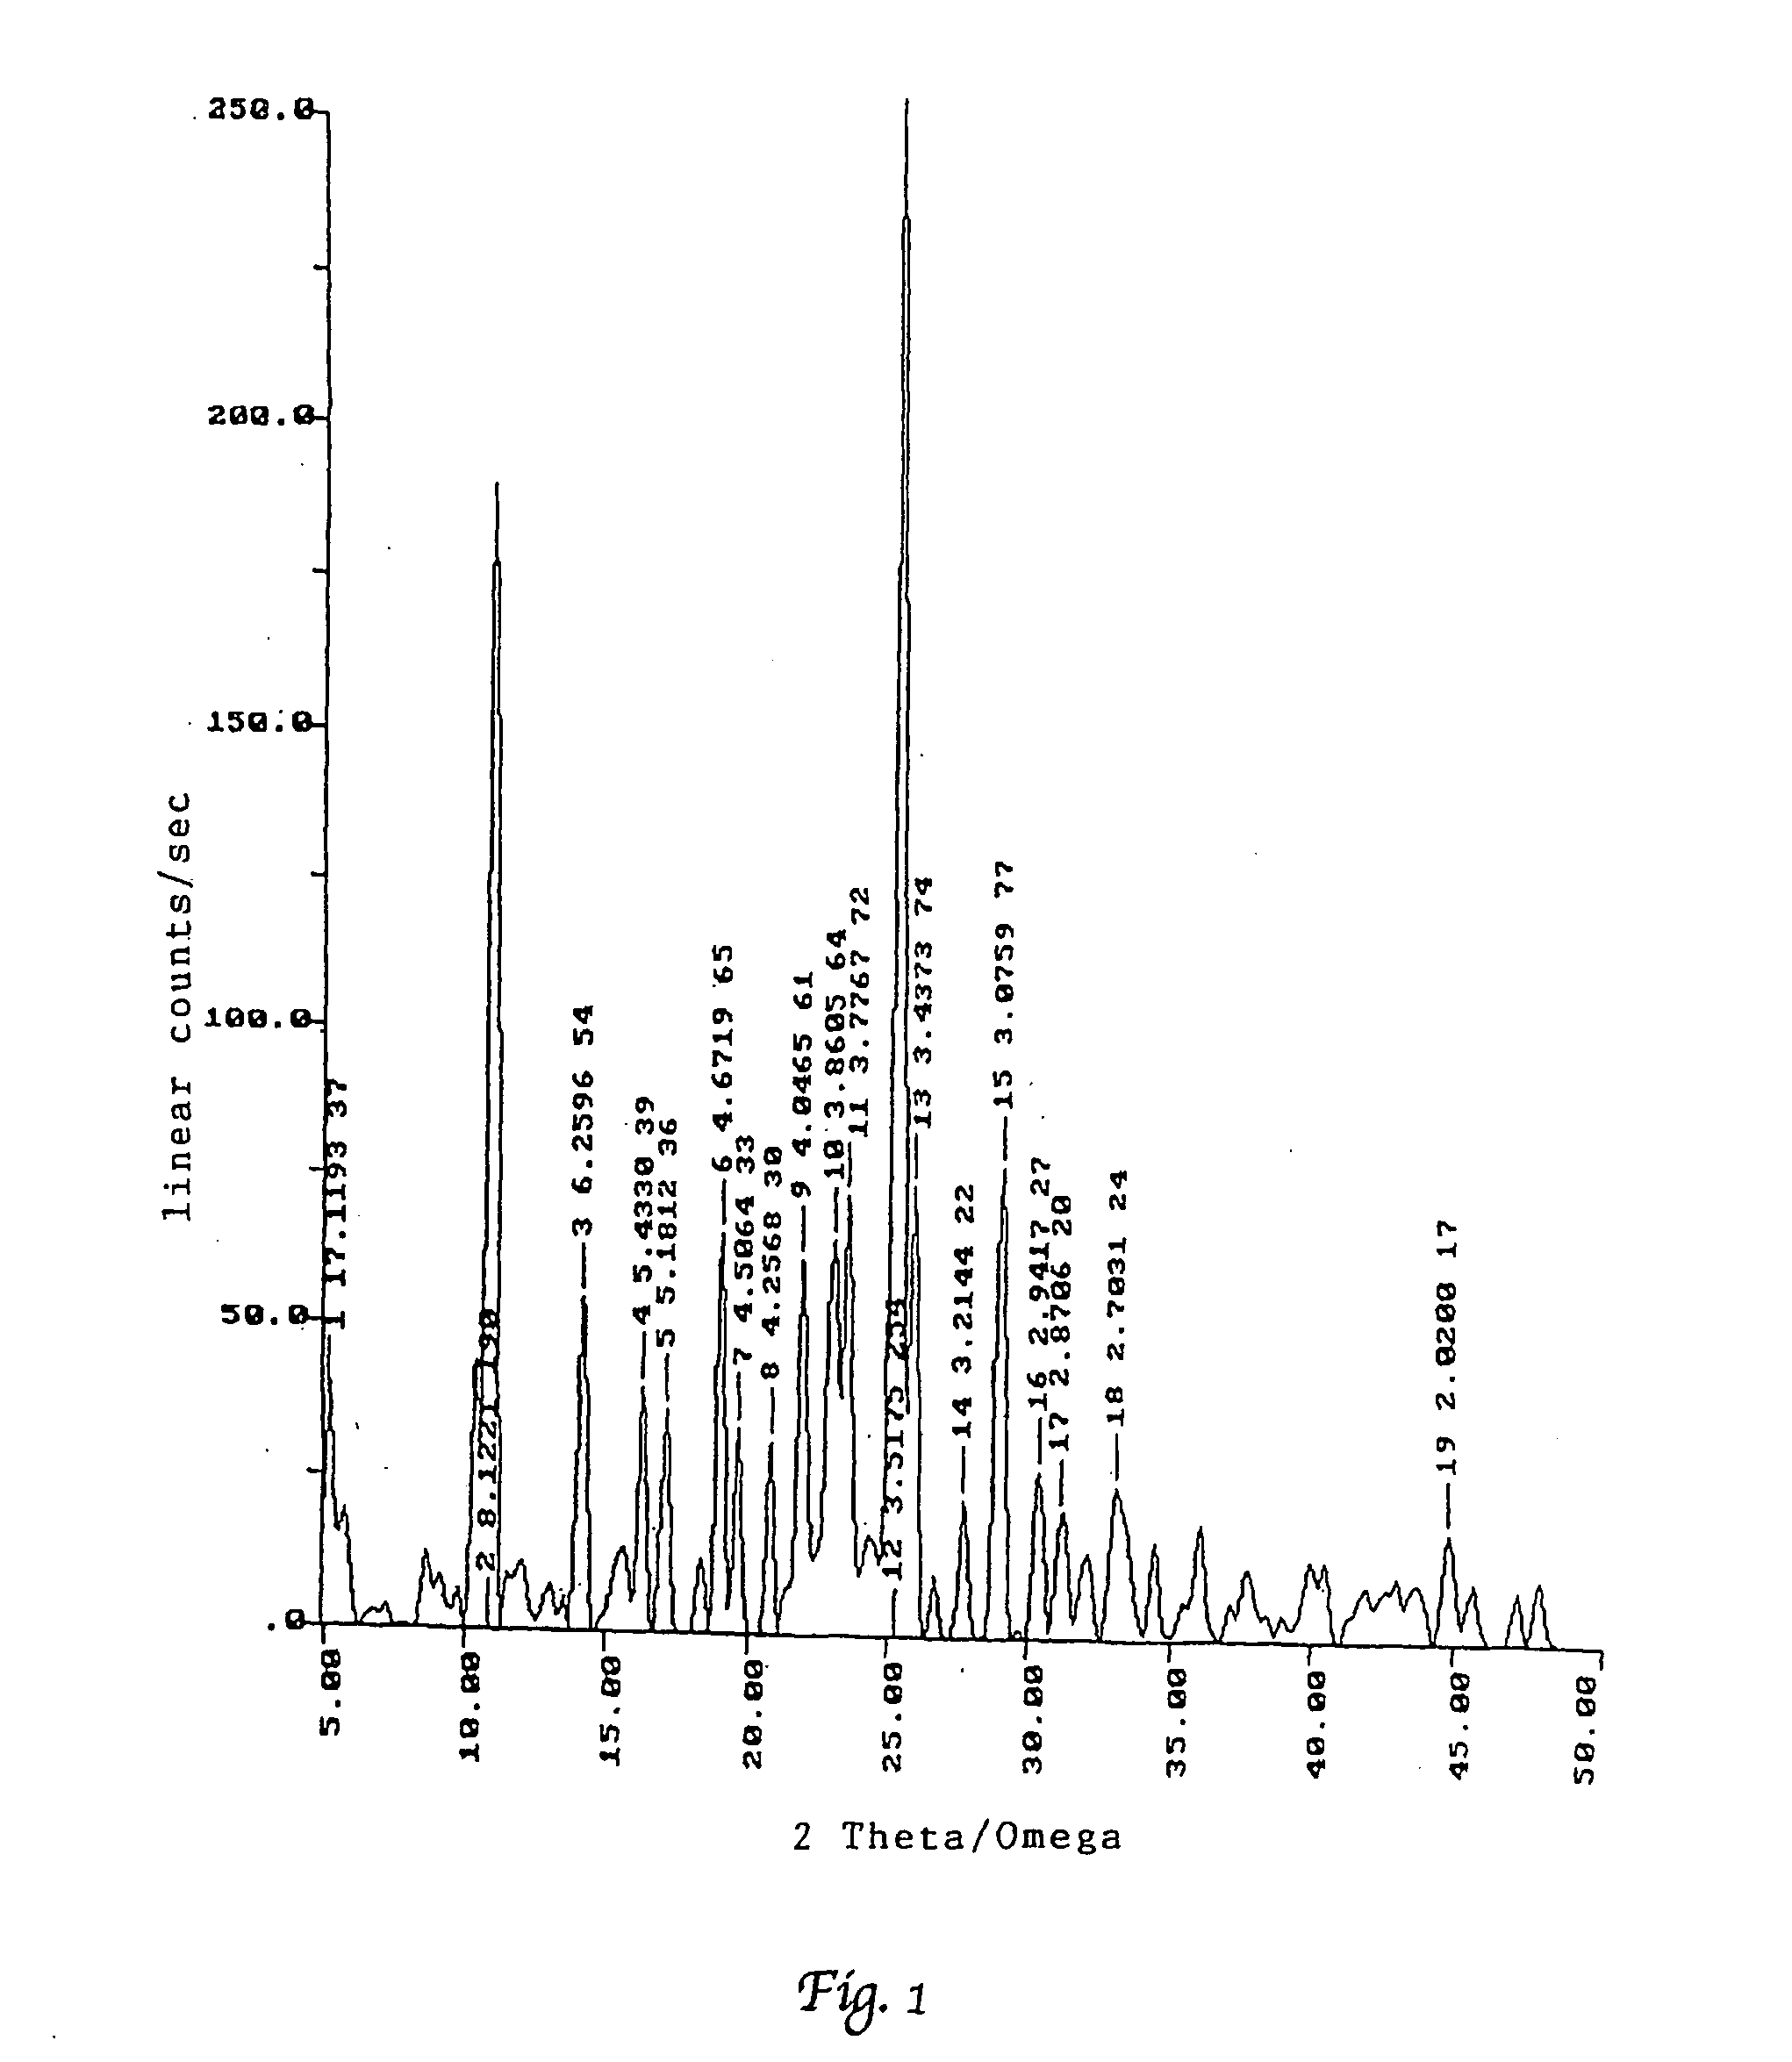 Process for preparation of polymorphic form of sertraline hydrochloride